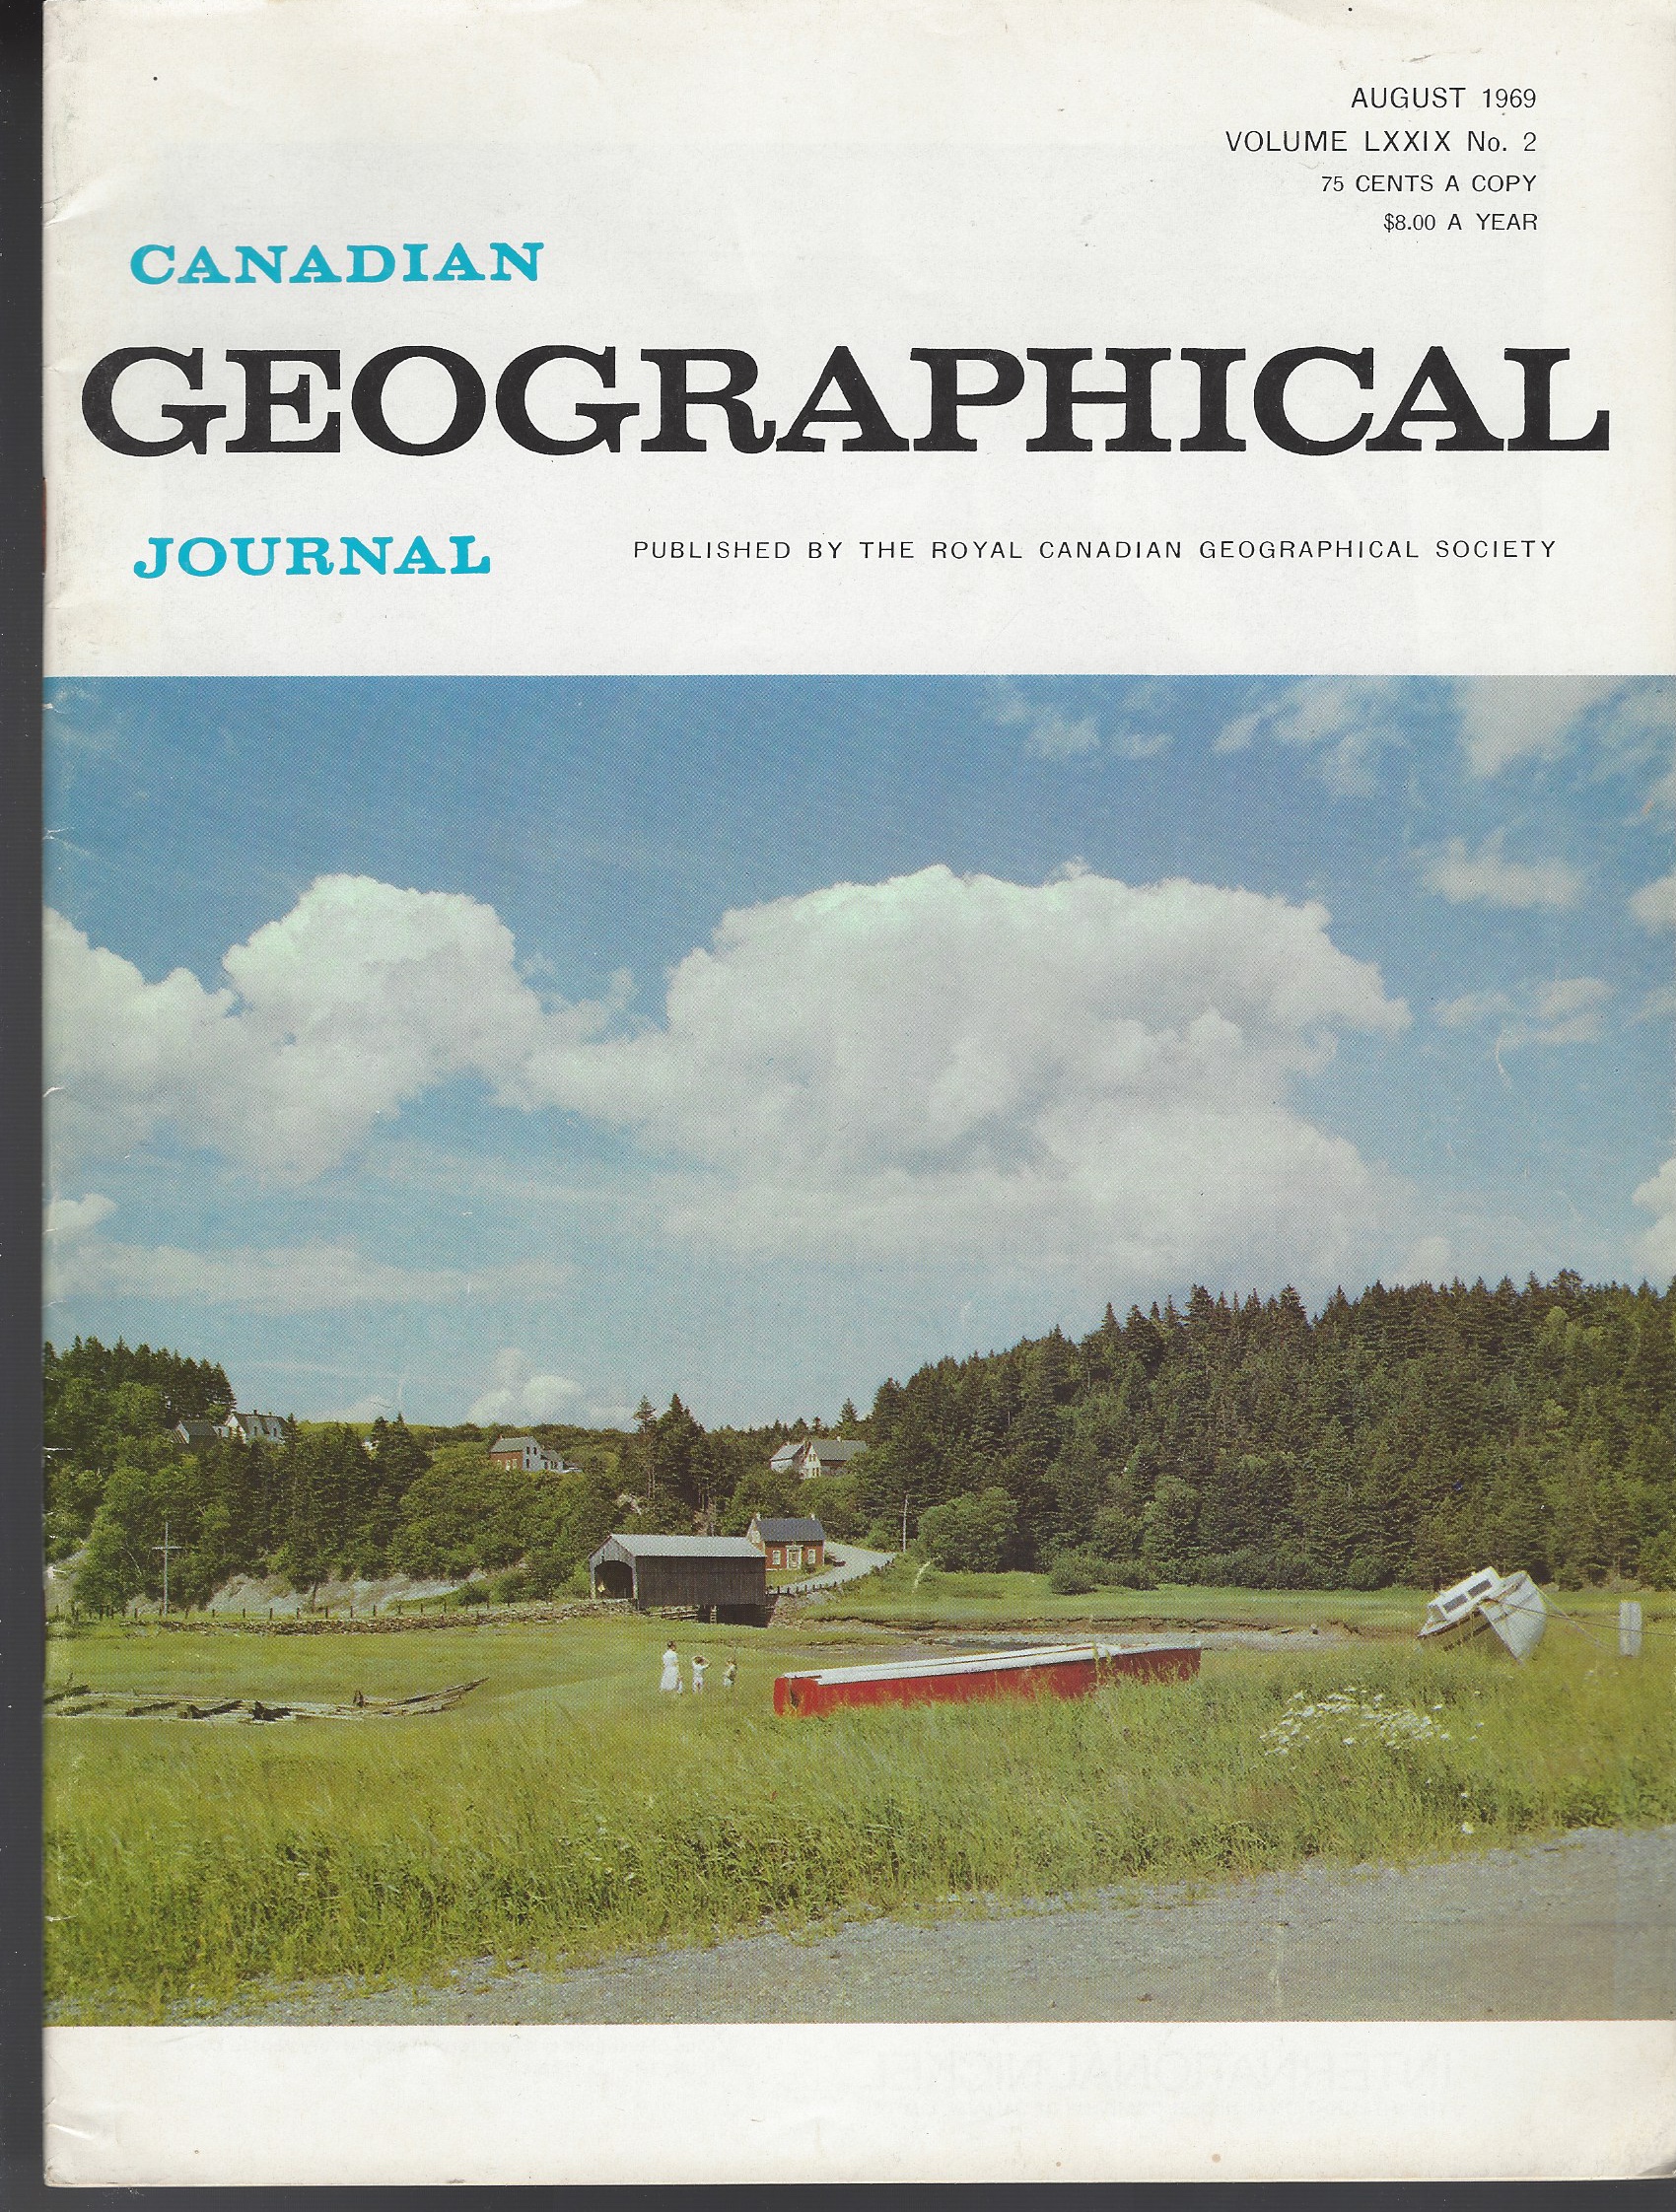 CANADIAN GEORGRAPHIC SOCIETY - Canadian Geographical Journal Volume 79, No. 2, August 1969